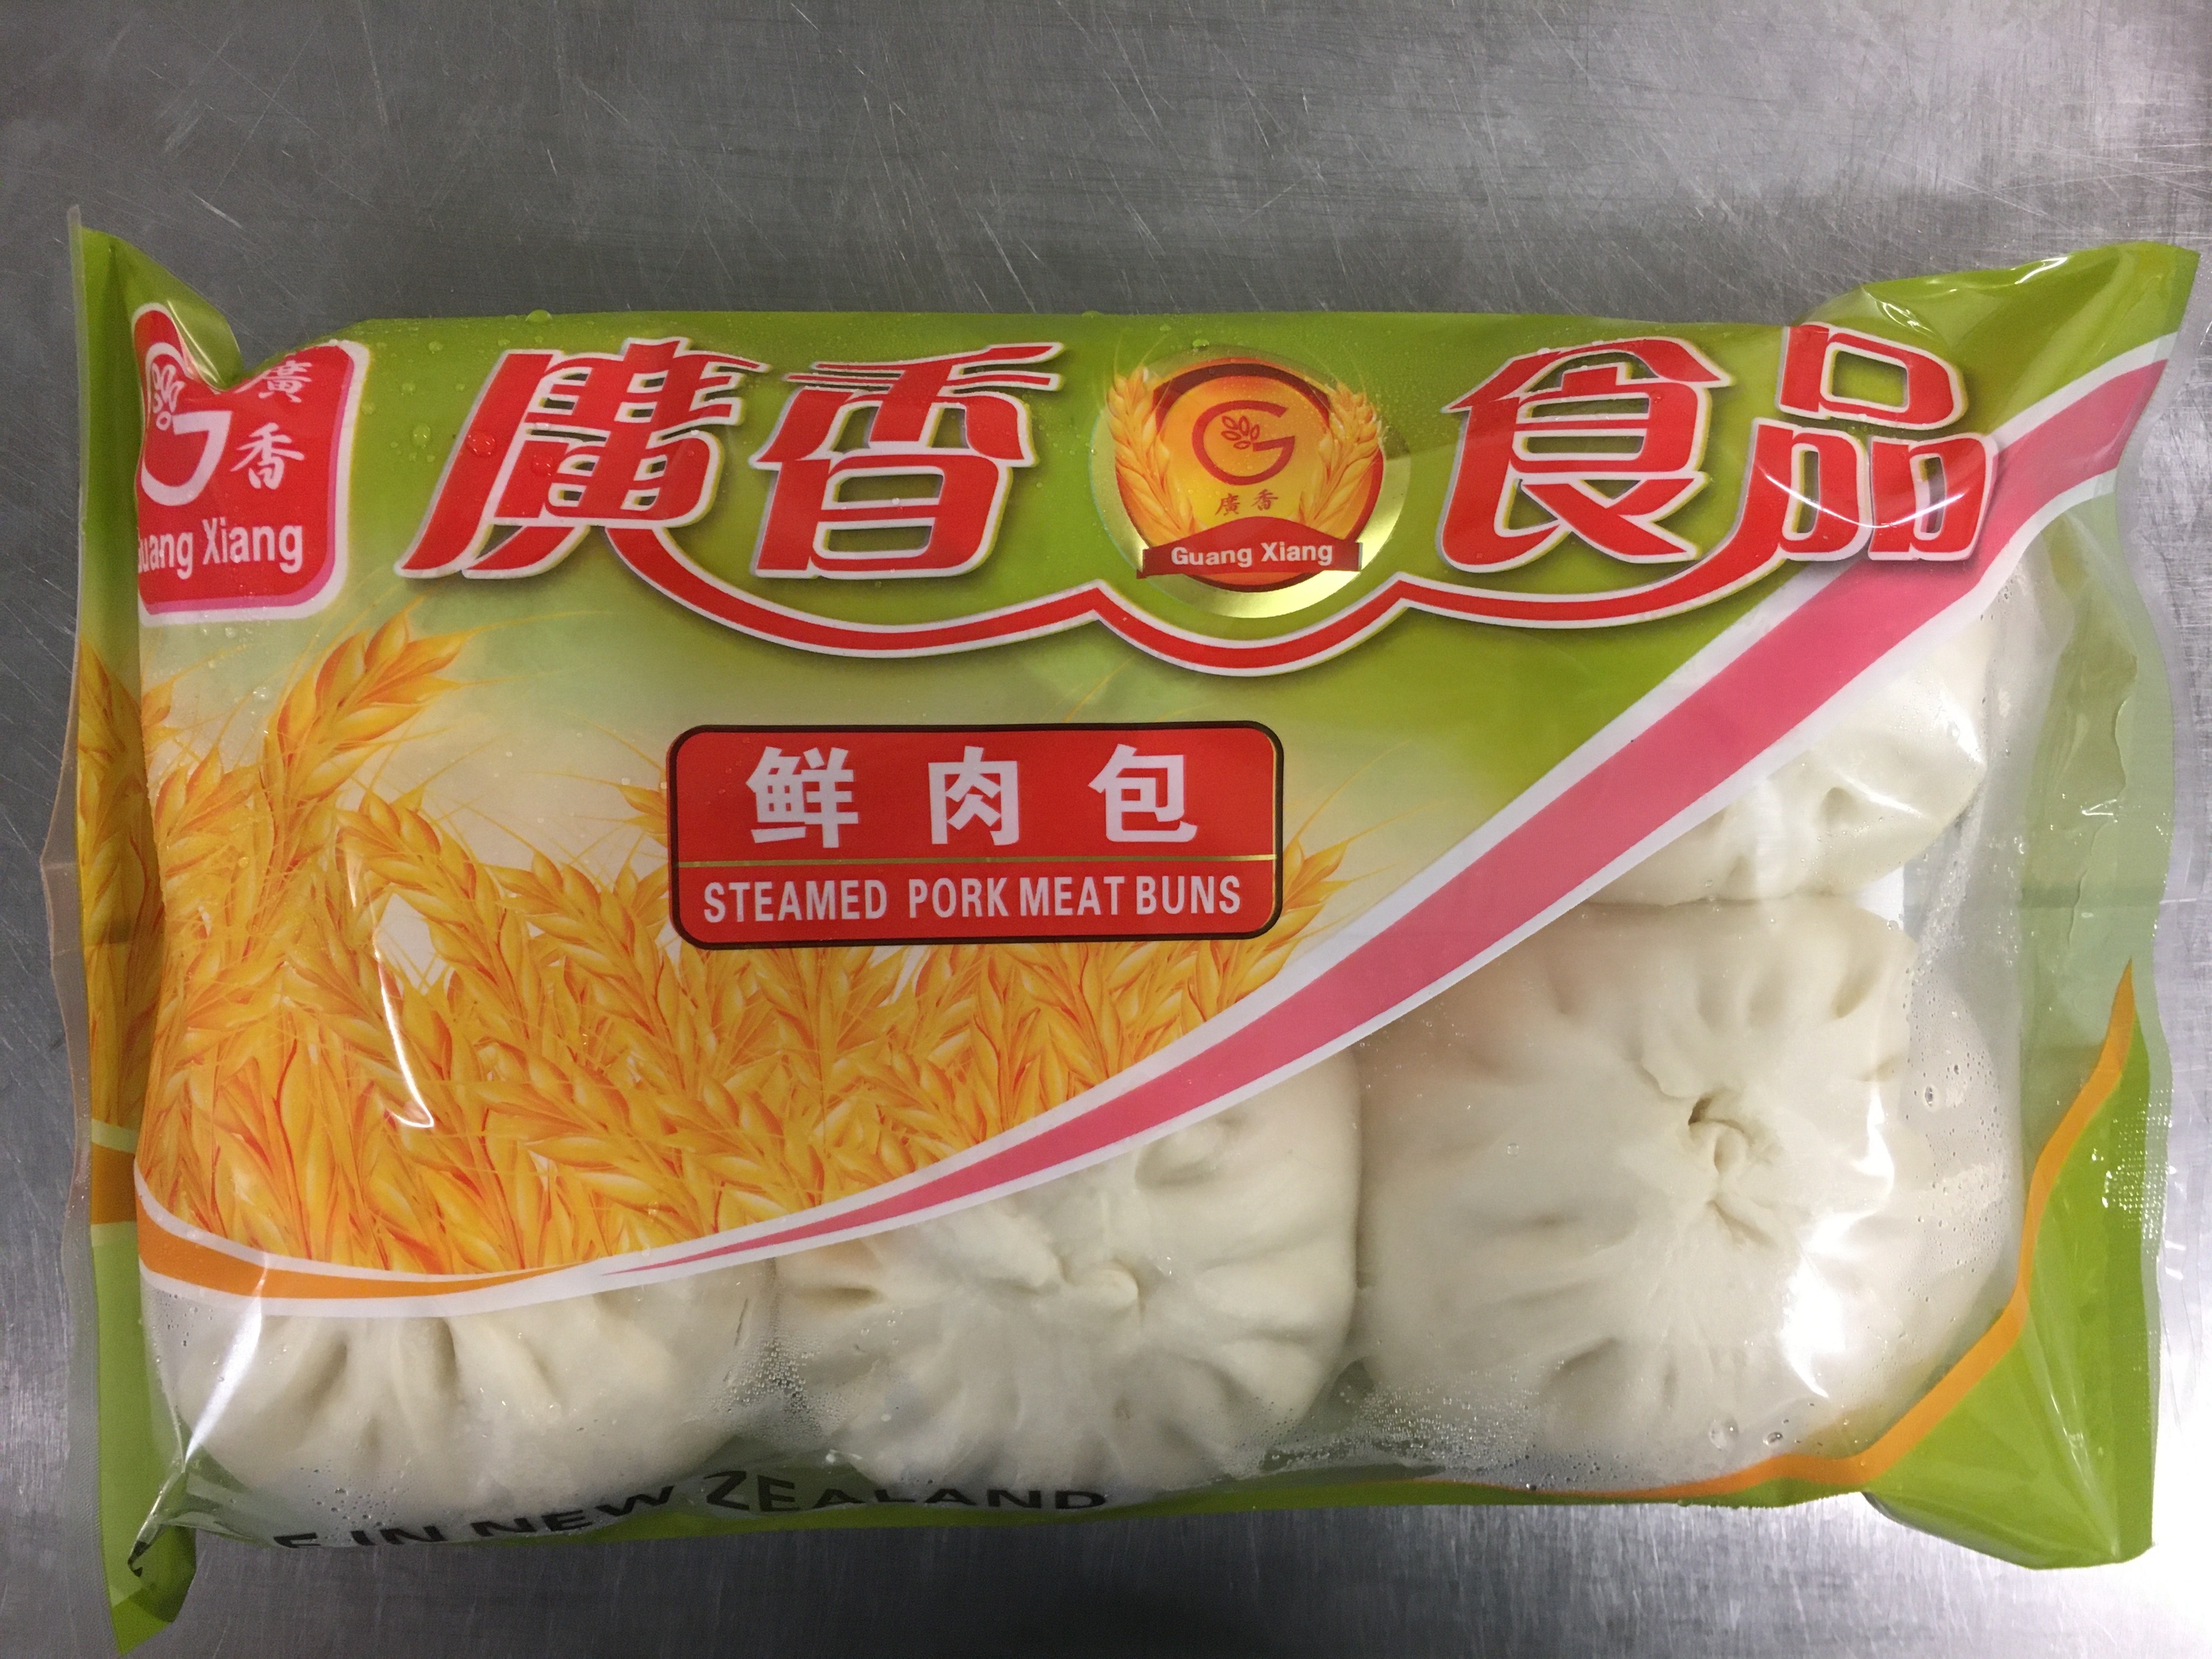 Image of Guangxiang brand Steamed Pork Meat Buns (522g) in a plasti pack